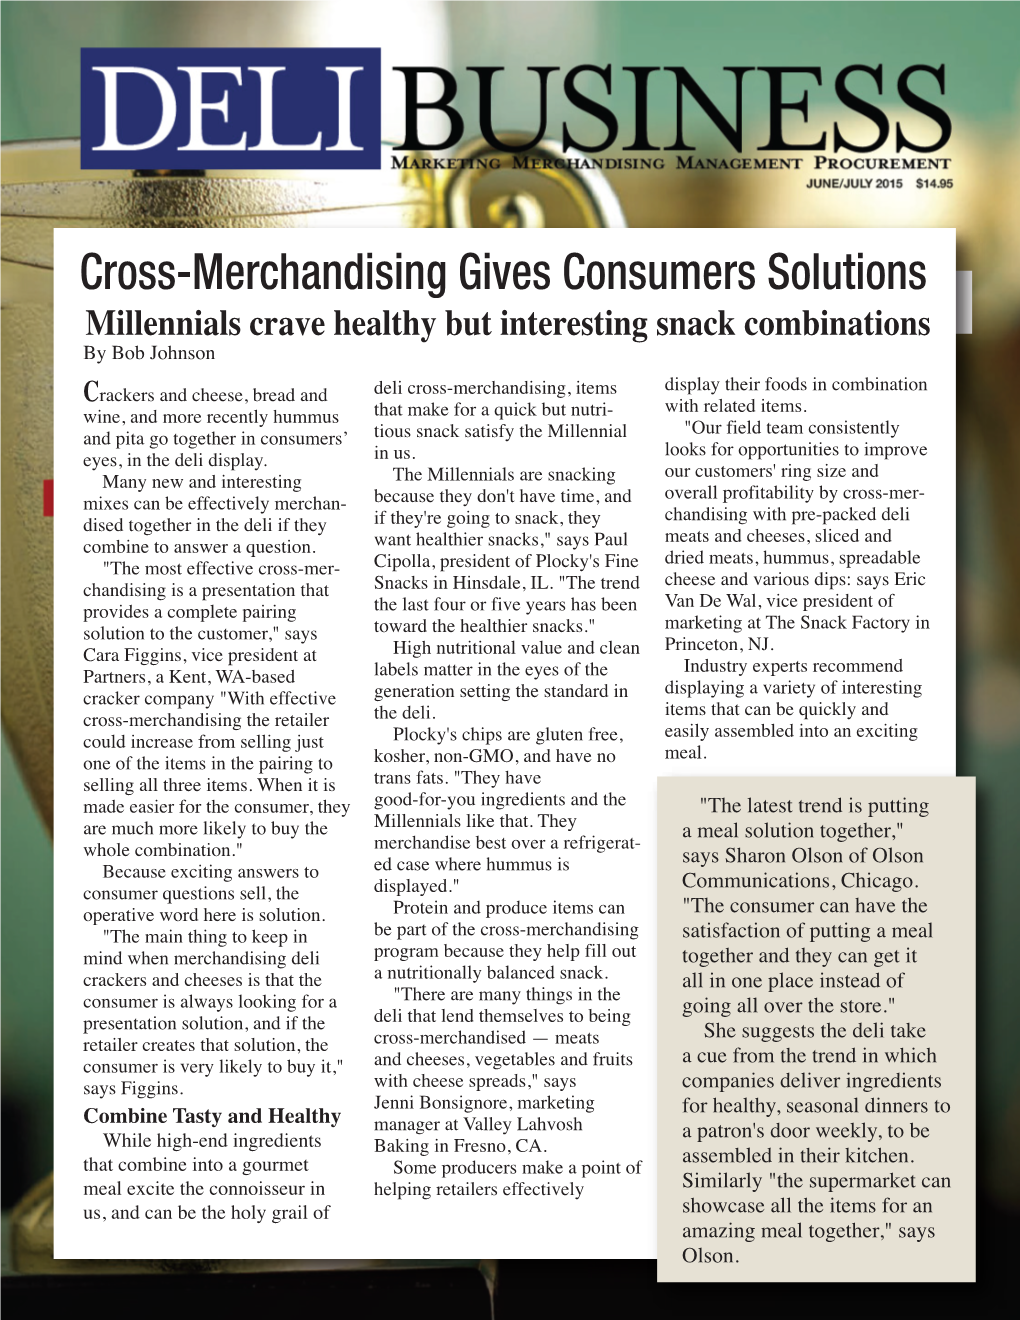 Cross-Merchandising Gives Consumers Solutions